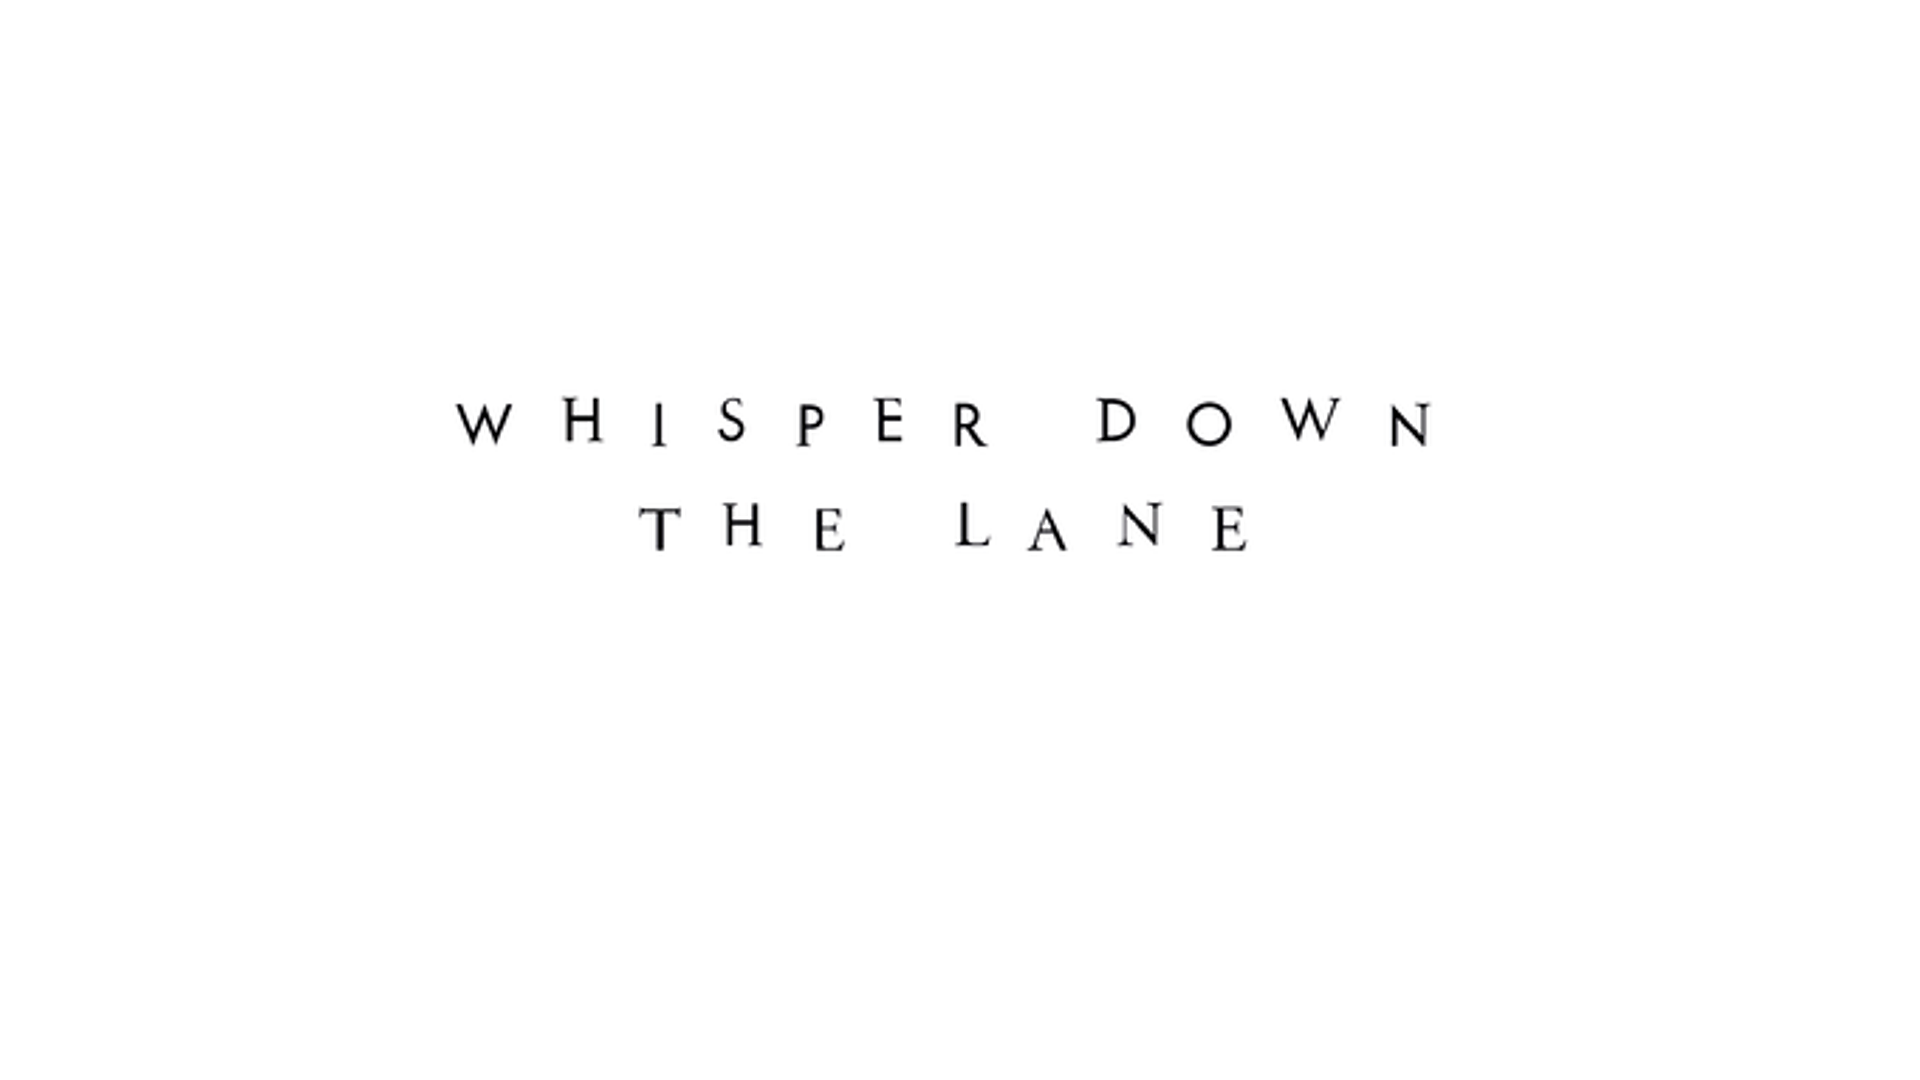 Project Whisper down the lane